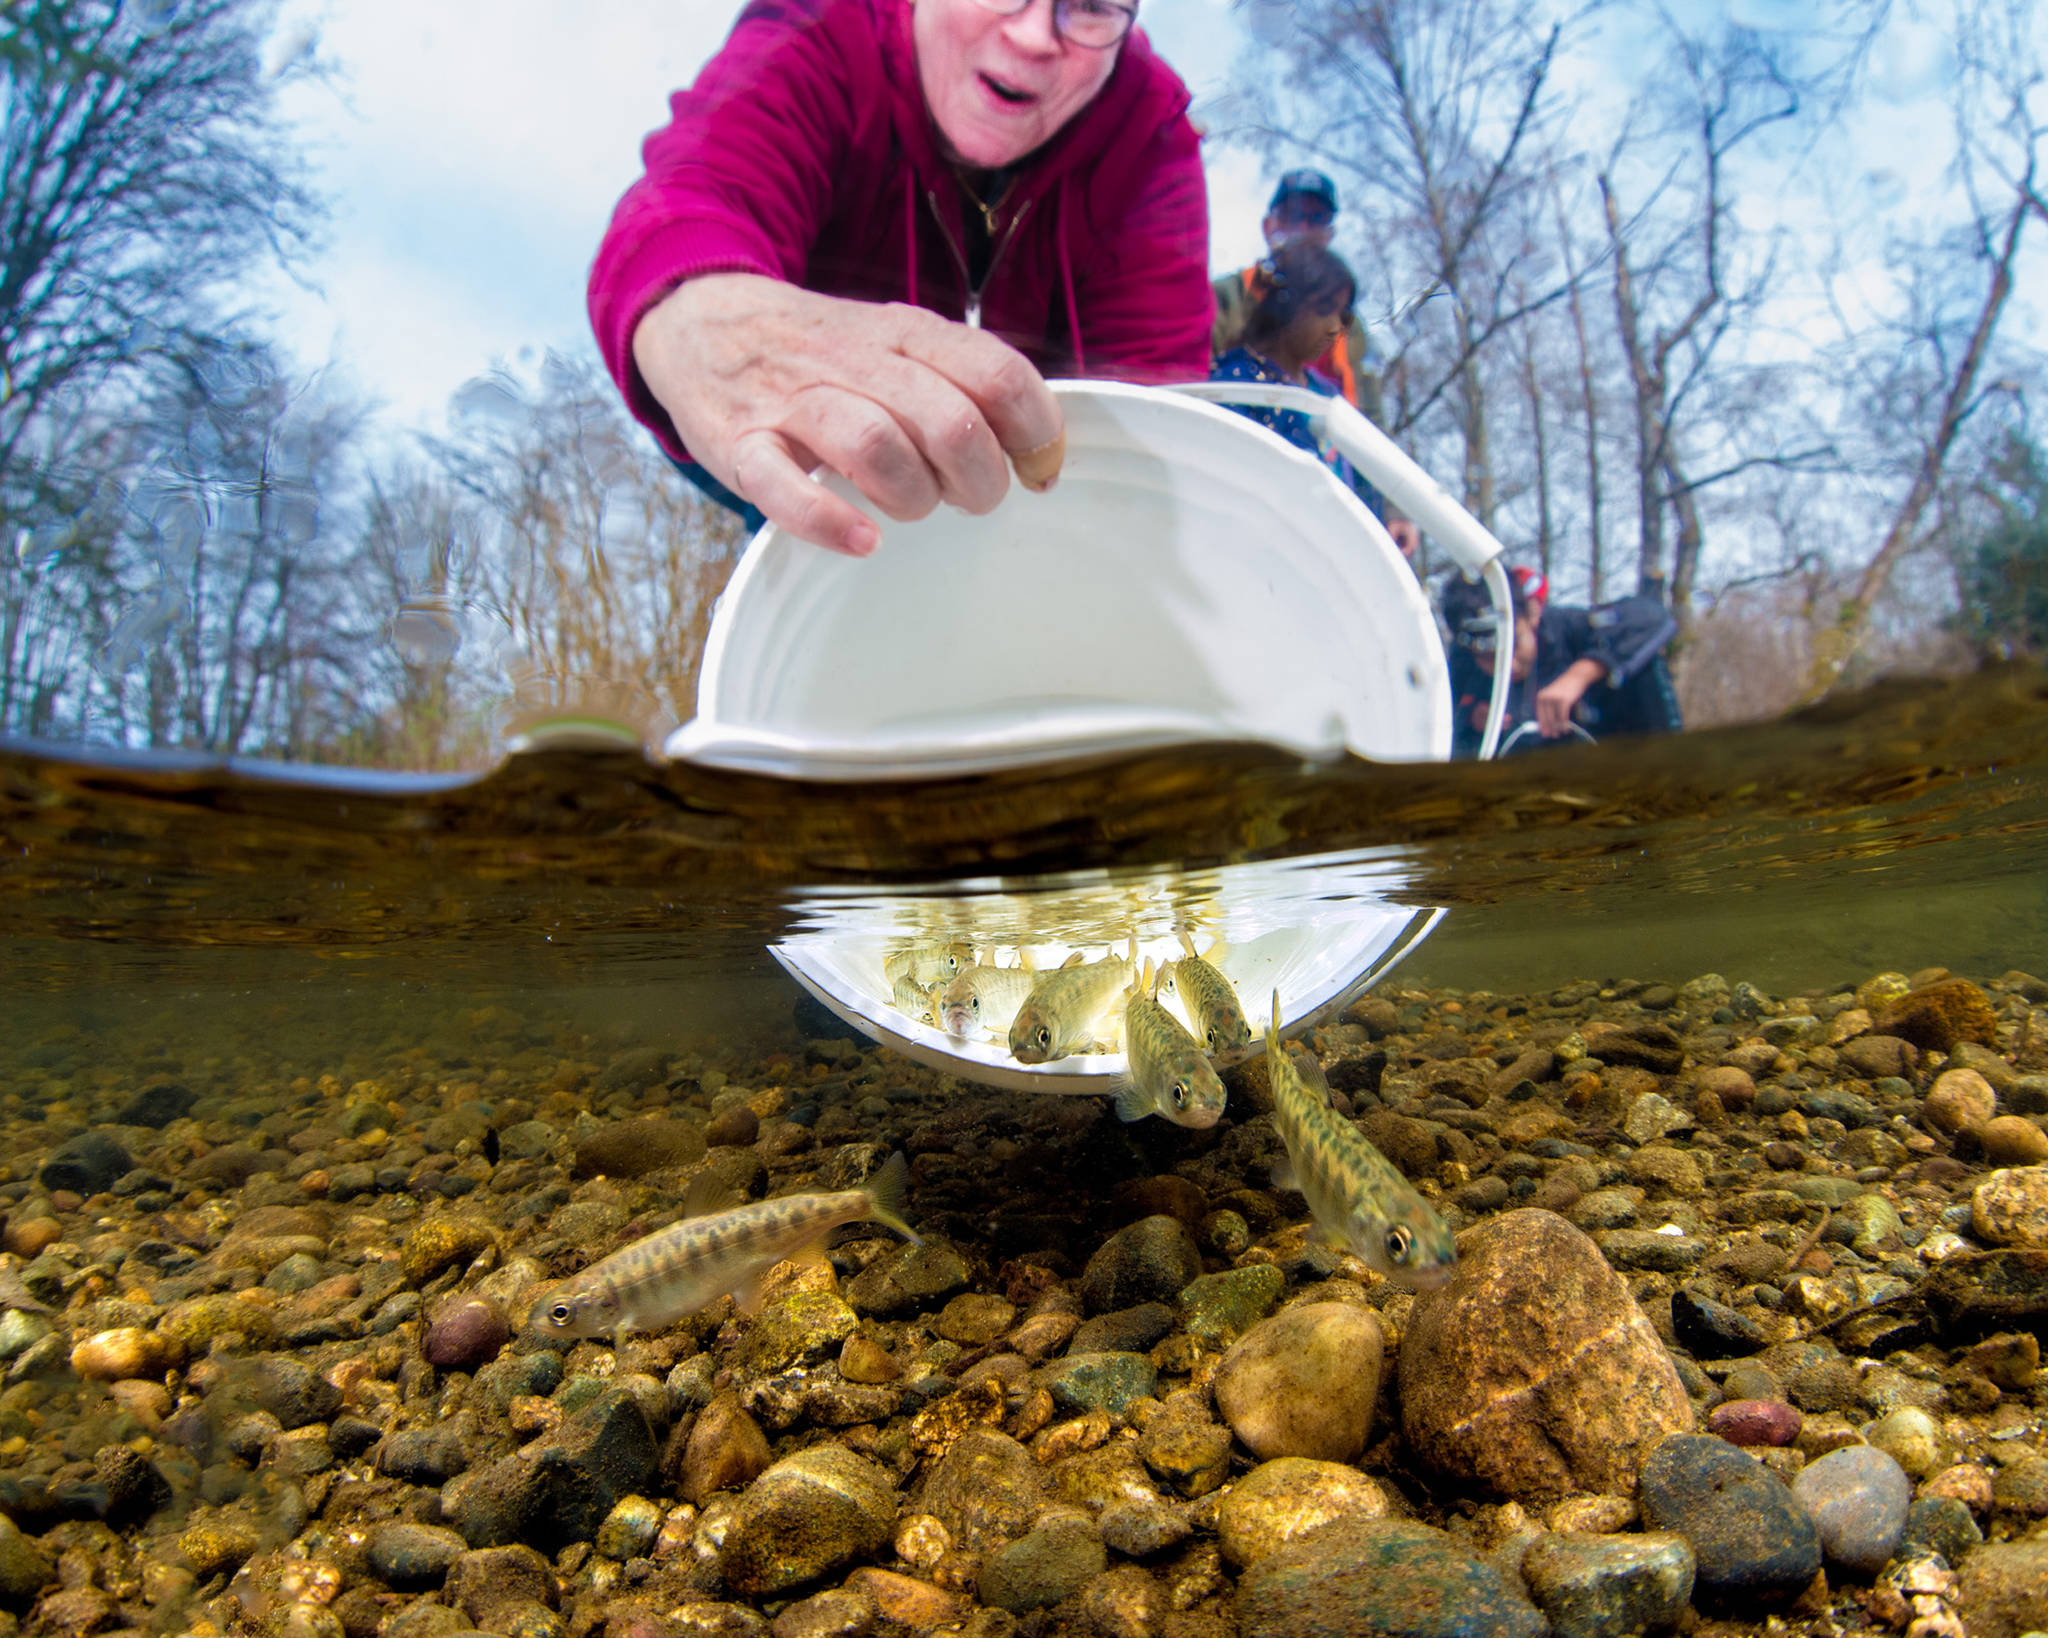 This photo, which won the International Year of the Salmon photo challenge for the Pacific, shows a woman releasing Chinook salmon fry in Surrey, British Columbia, south of the Fraser River. (Courtesy Photo | Fernando Lessa)